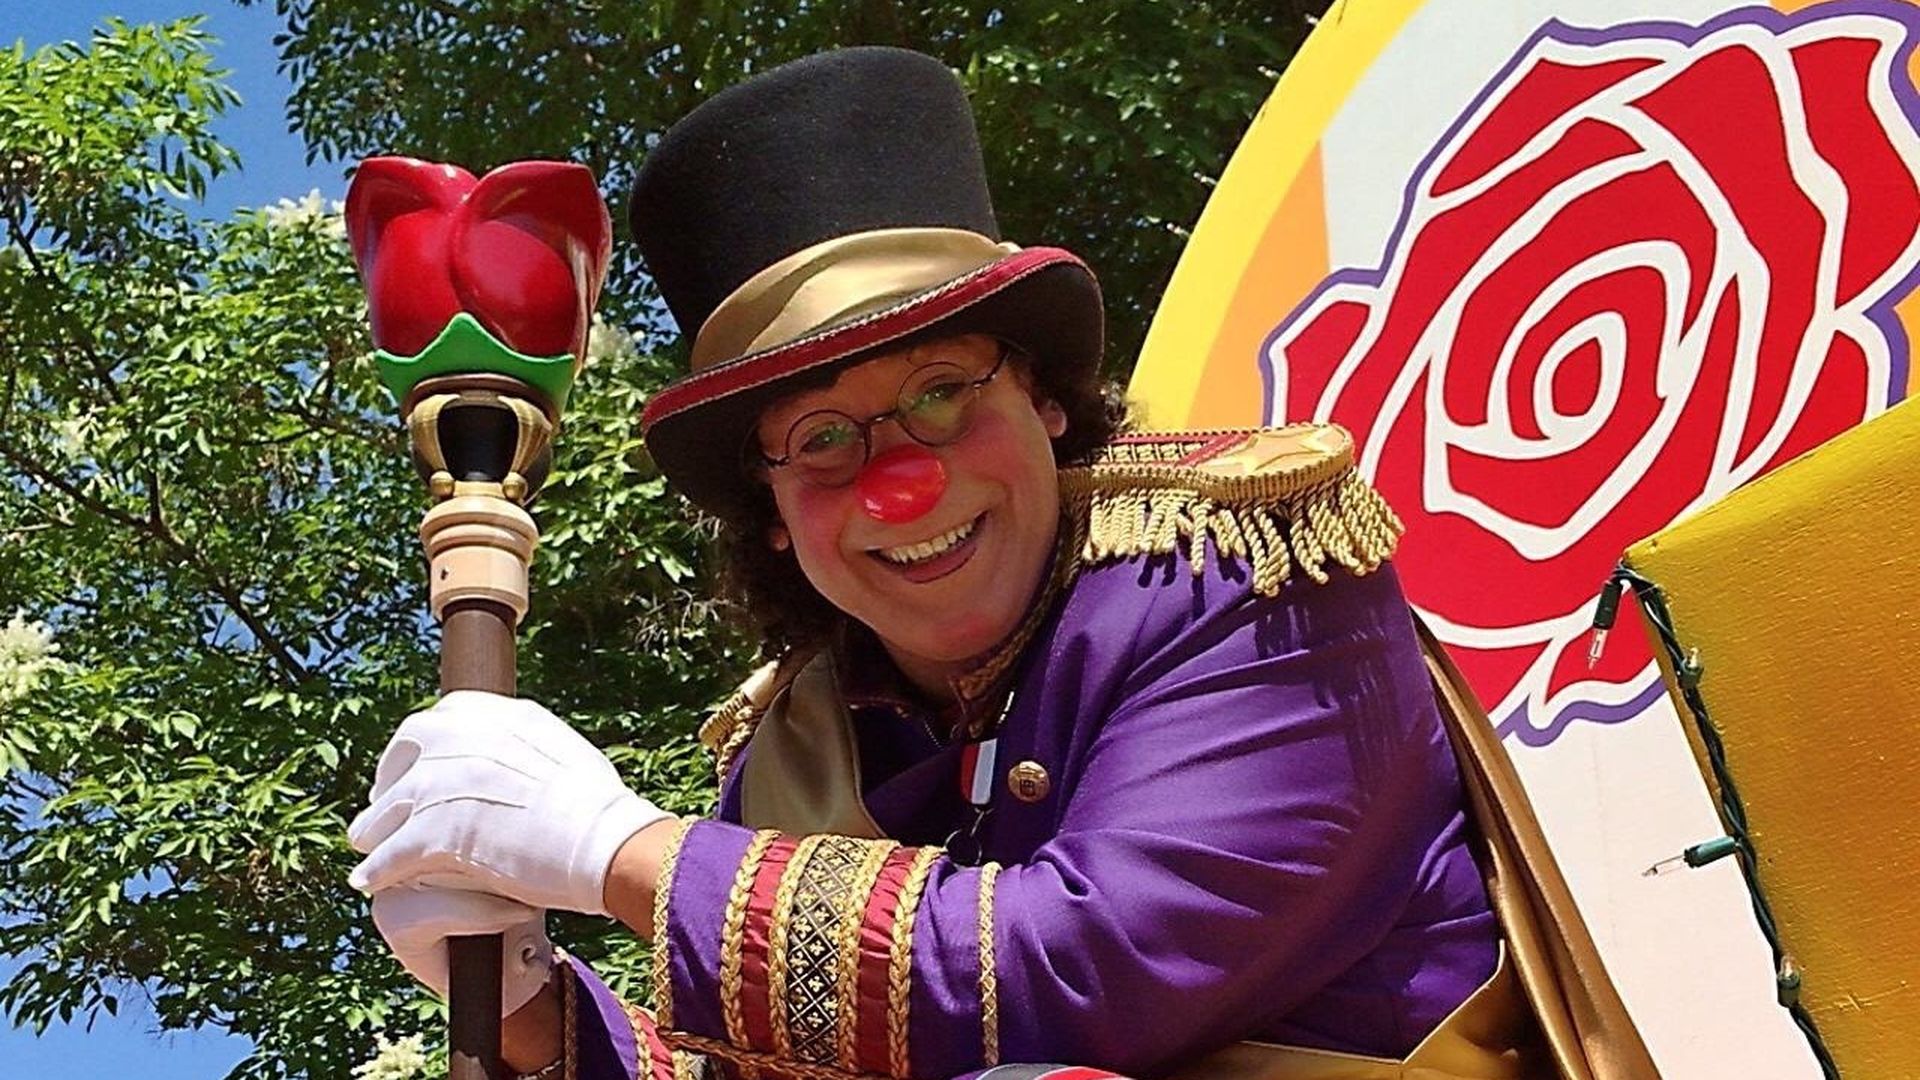 A clown wearing a red nose, black top hat, white glove and a purple jacket smiles from a float in a parade.